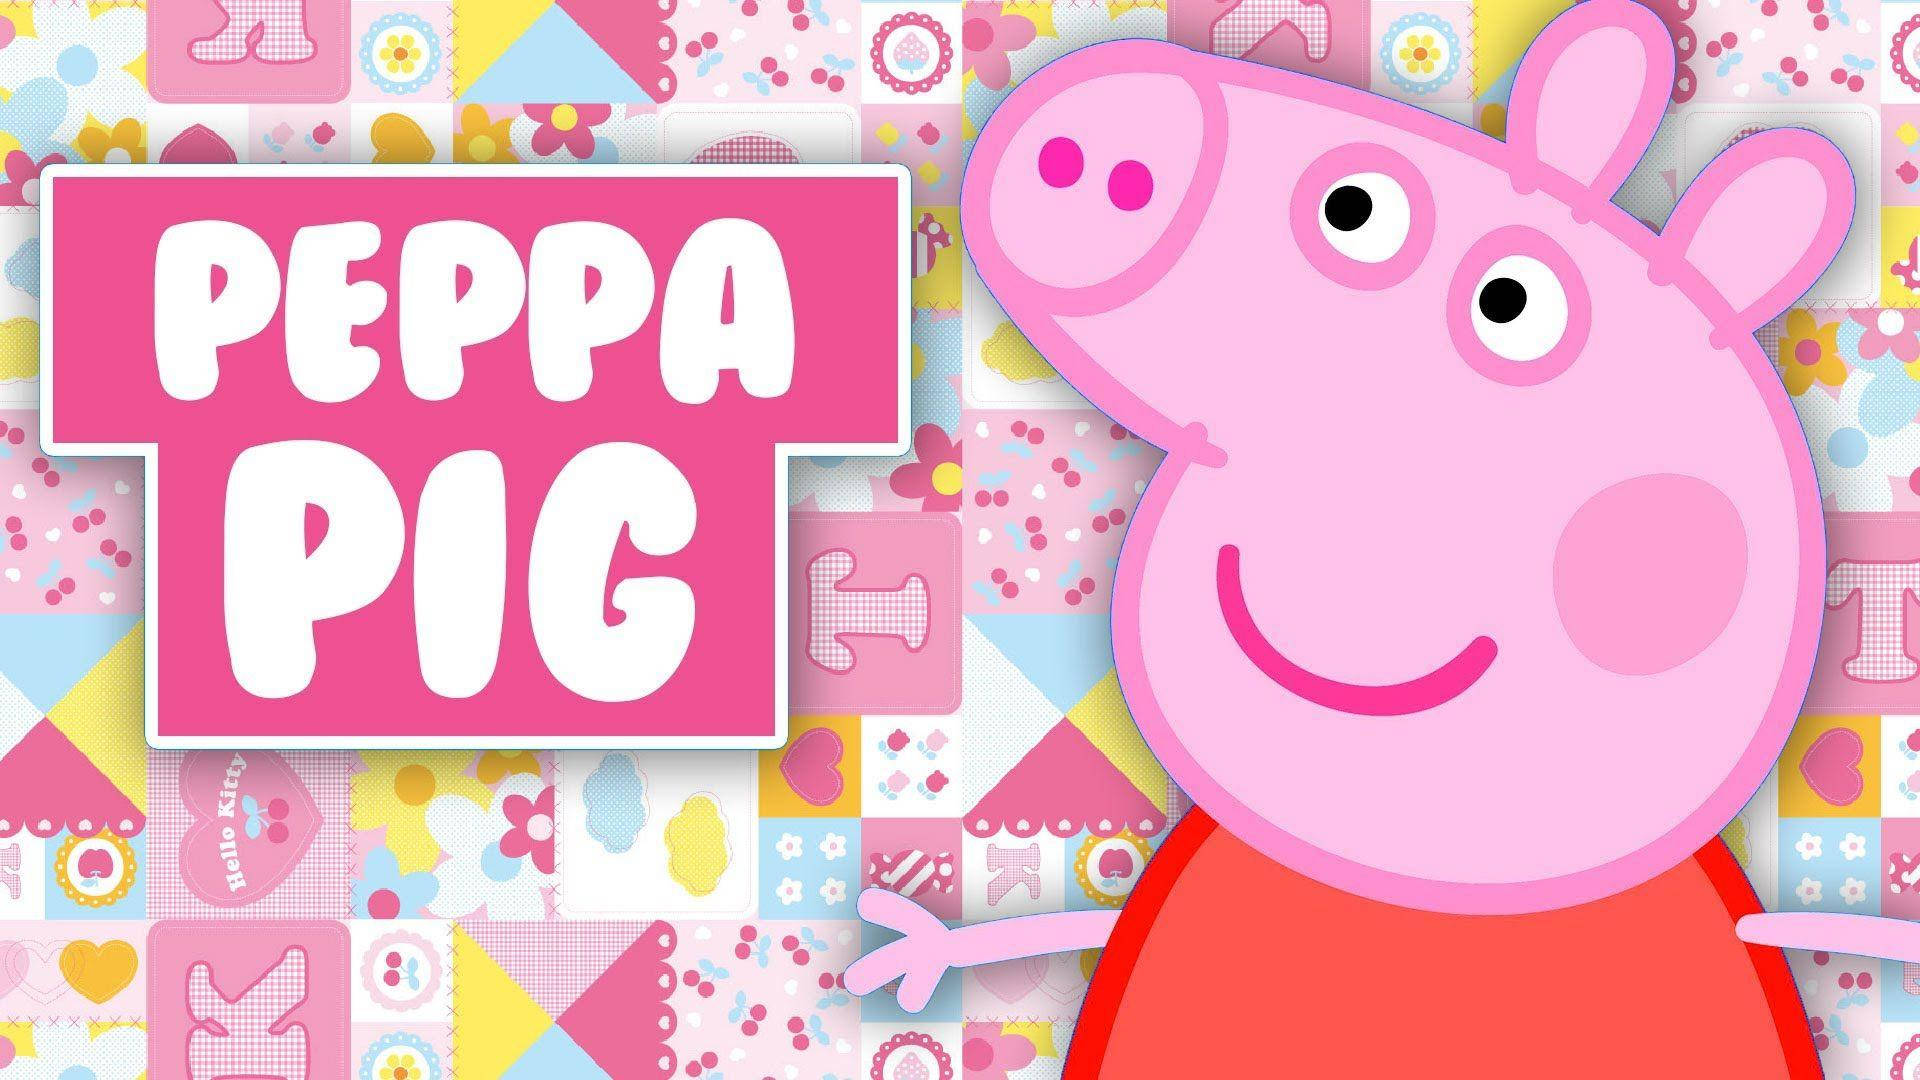 Adorable Peppa Pig Tablet Displayed On Hello Kitty Backdrop Background